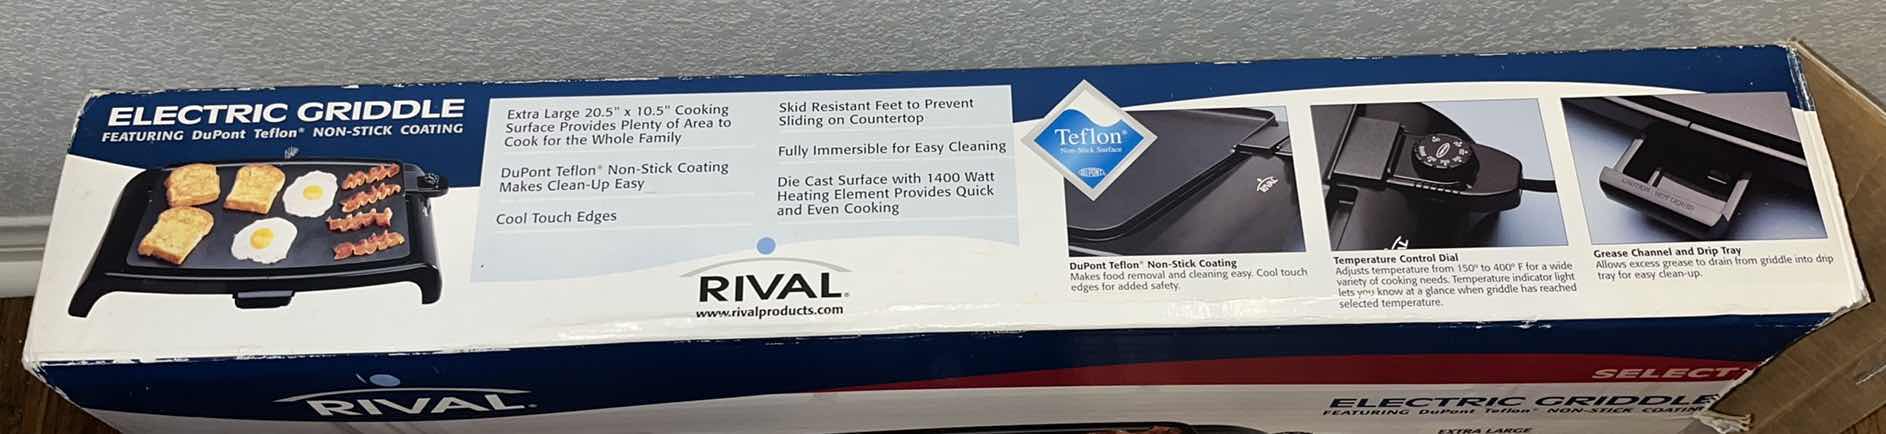 Photo 4 of RIVAL SELECT ELECTRIC GRIDDLE FEATURING DUPONT TEFLON NON-STICK COATING, EXTRA LARGE FAMILY SIZE COOKING SURFACE, MODEL GR100 BN